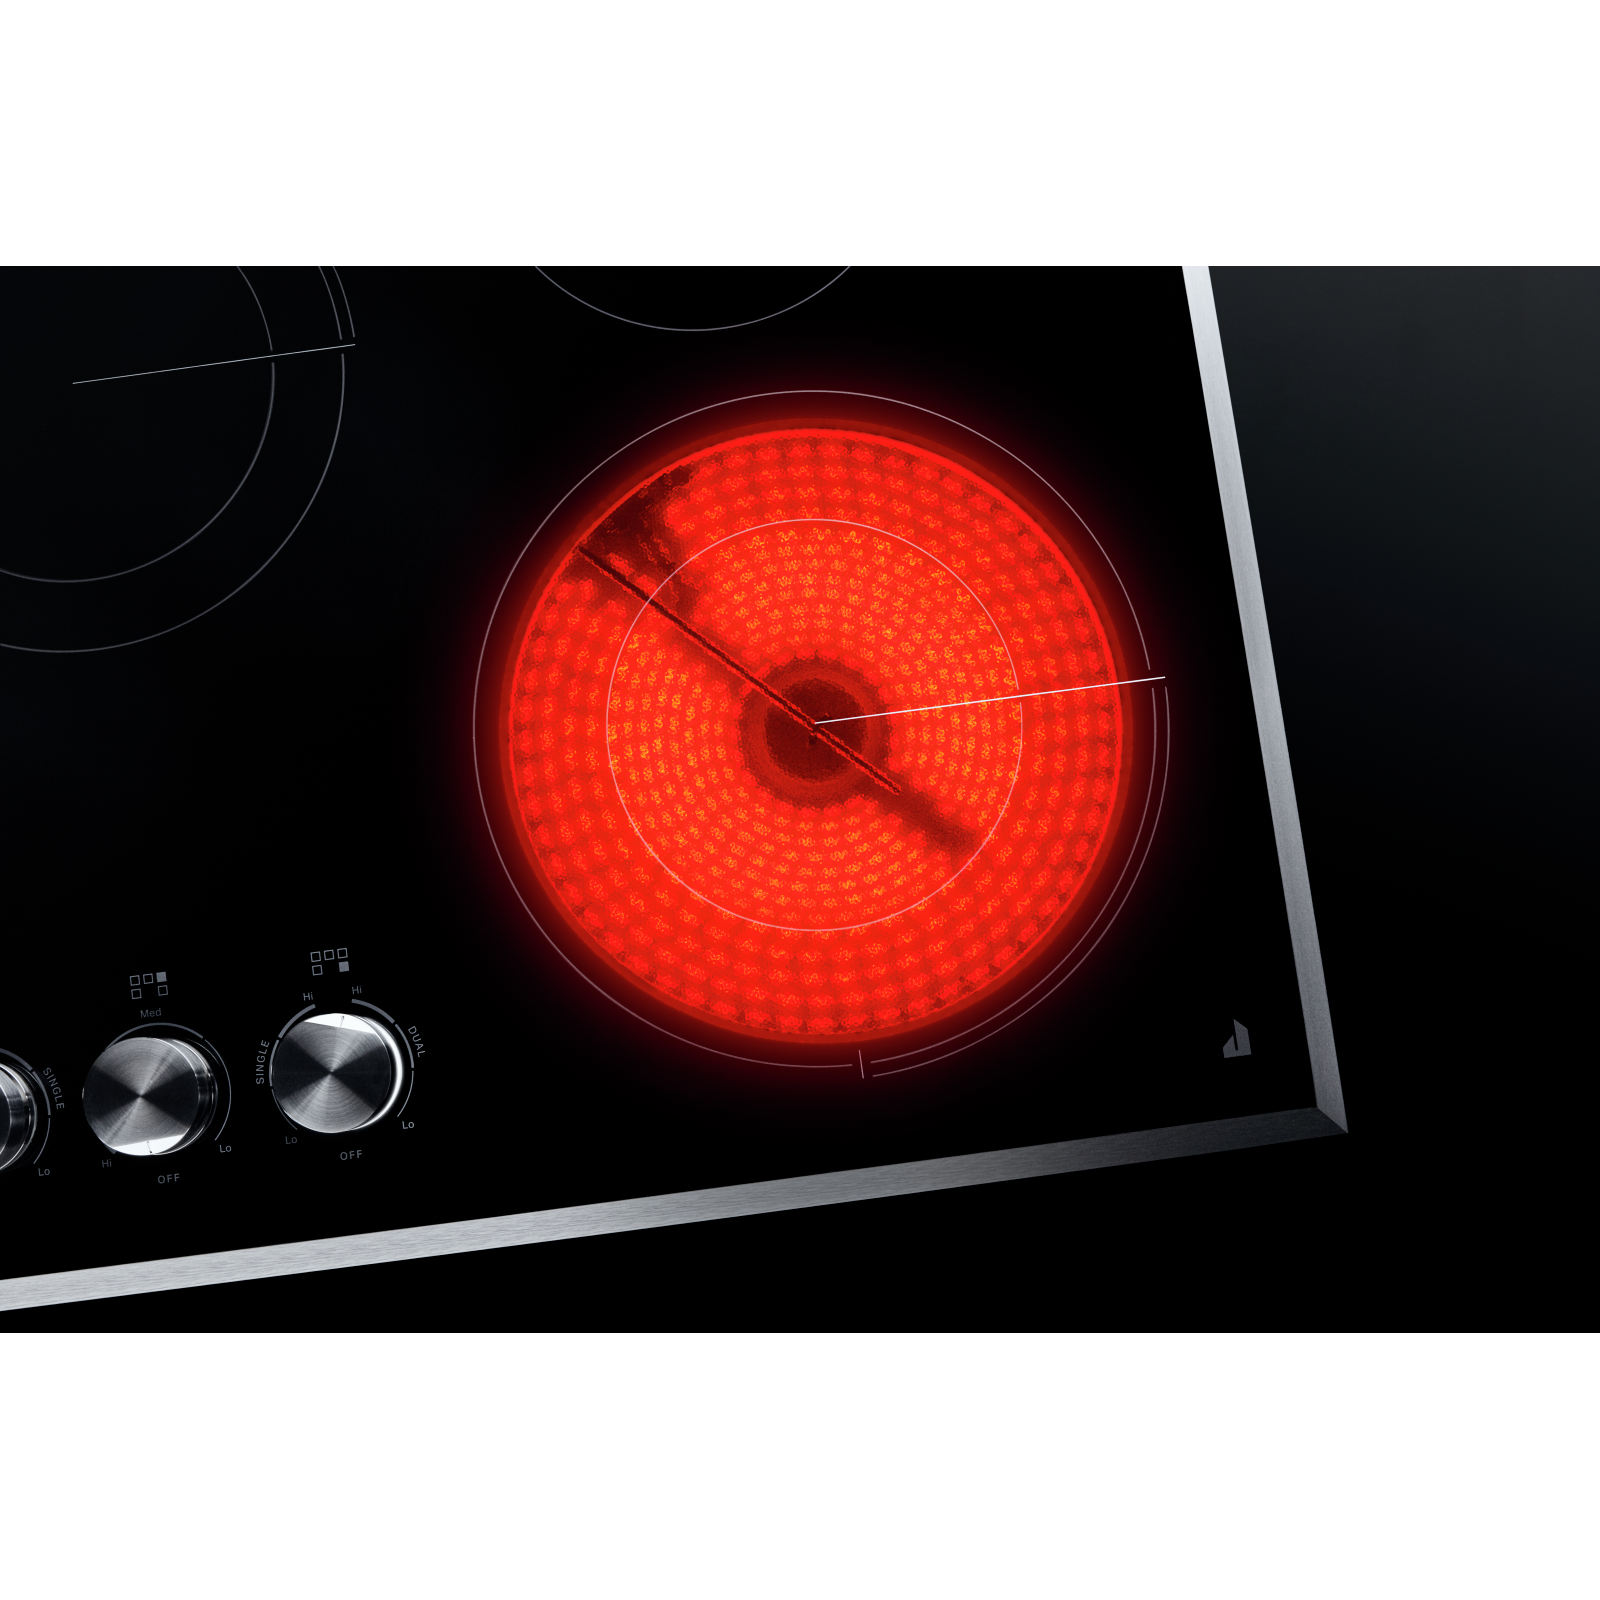 JennAir - 30.81 Inch Electric Cooktop in Stainless (Open Box) - JEC3430HB